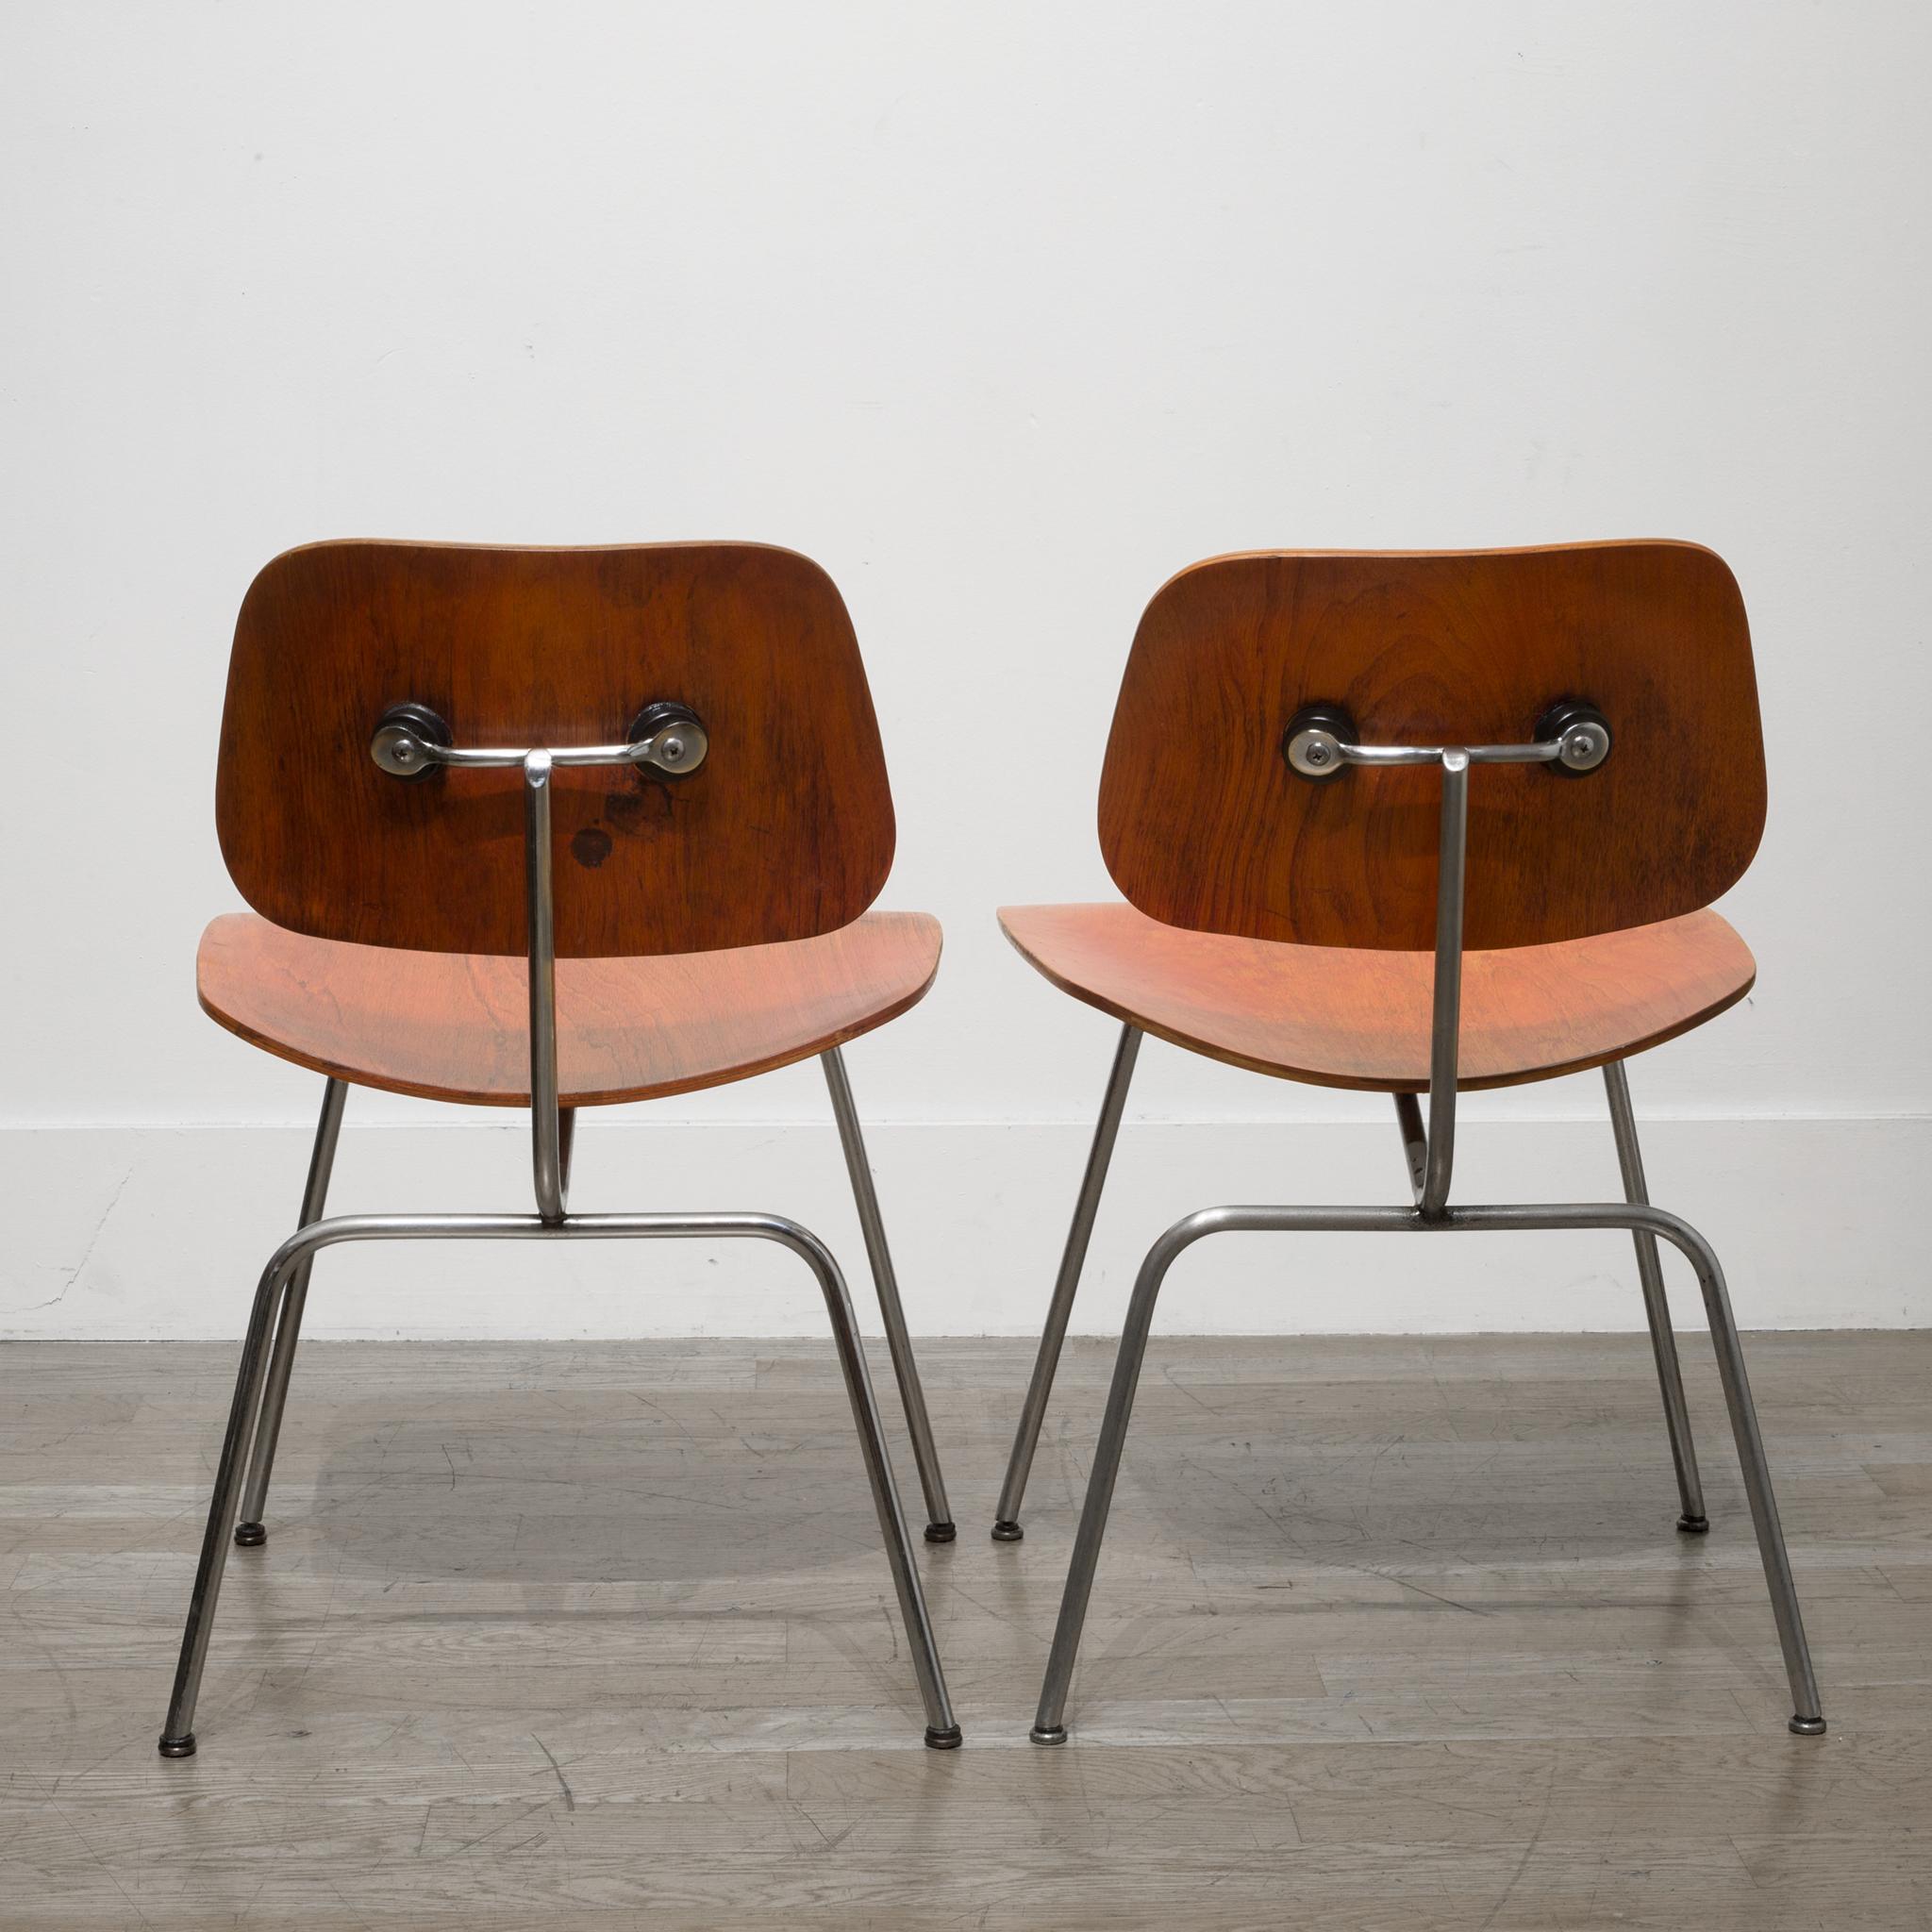 20th Century Set of Rare Red Aniline Herman Miller DCM Chairs, possibly Evans circa 1950-1960